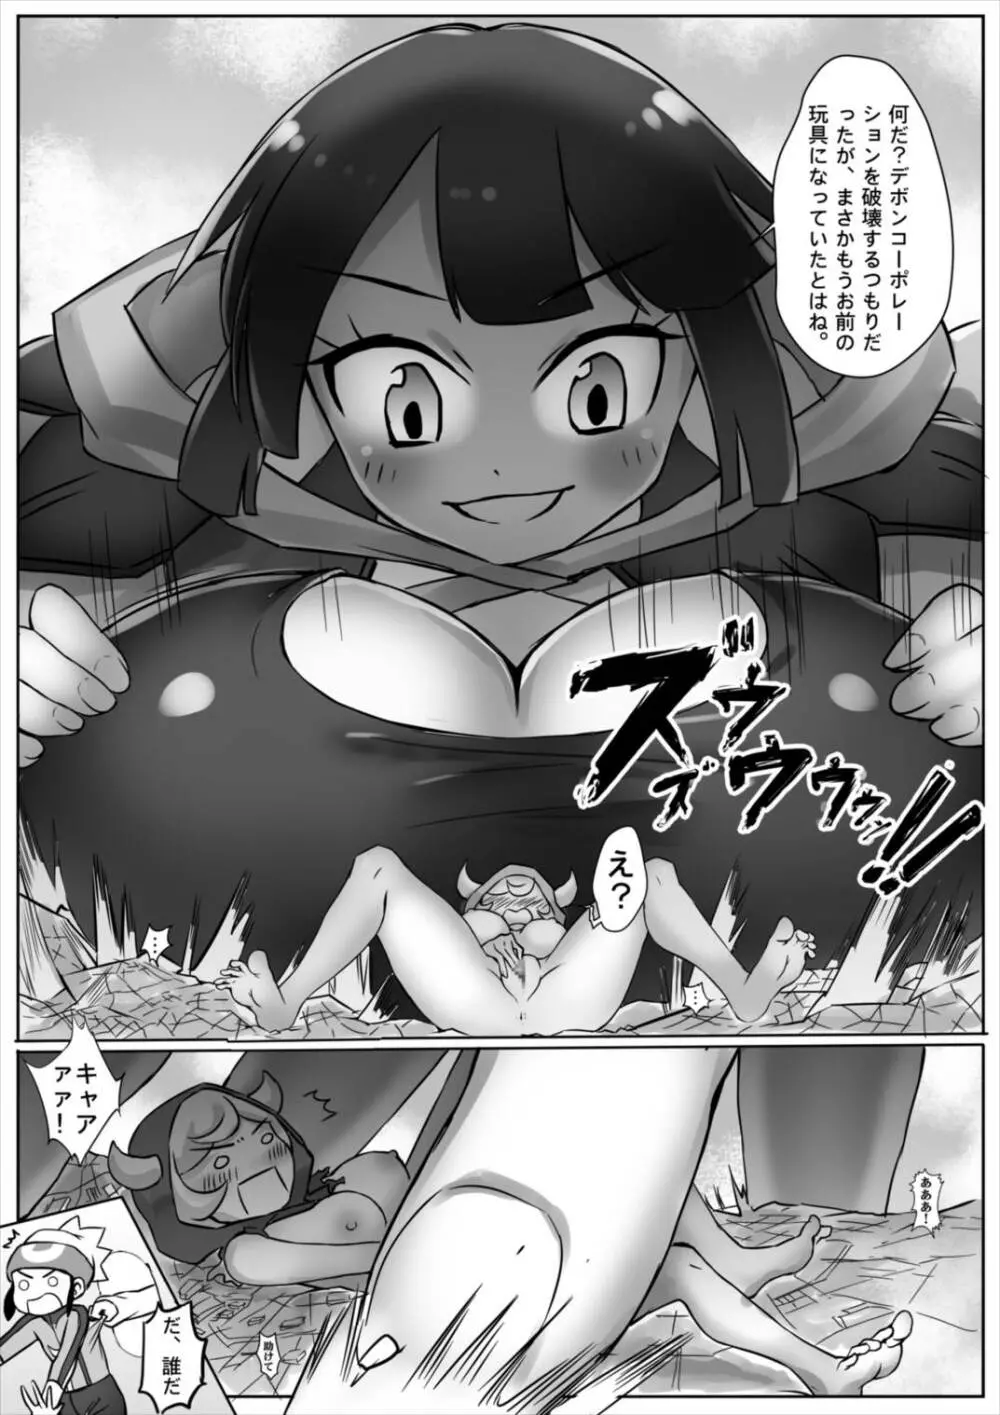 Pokemon GS -To Be continued!?- Page.13